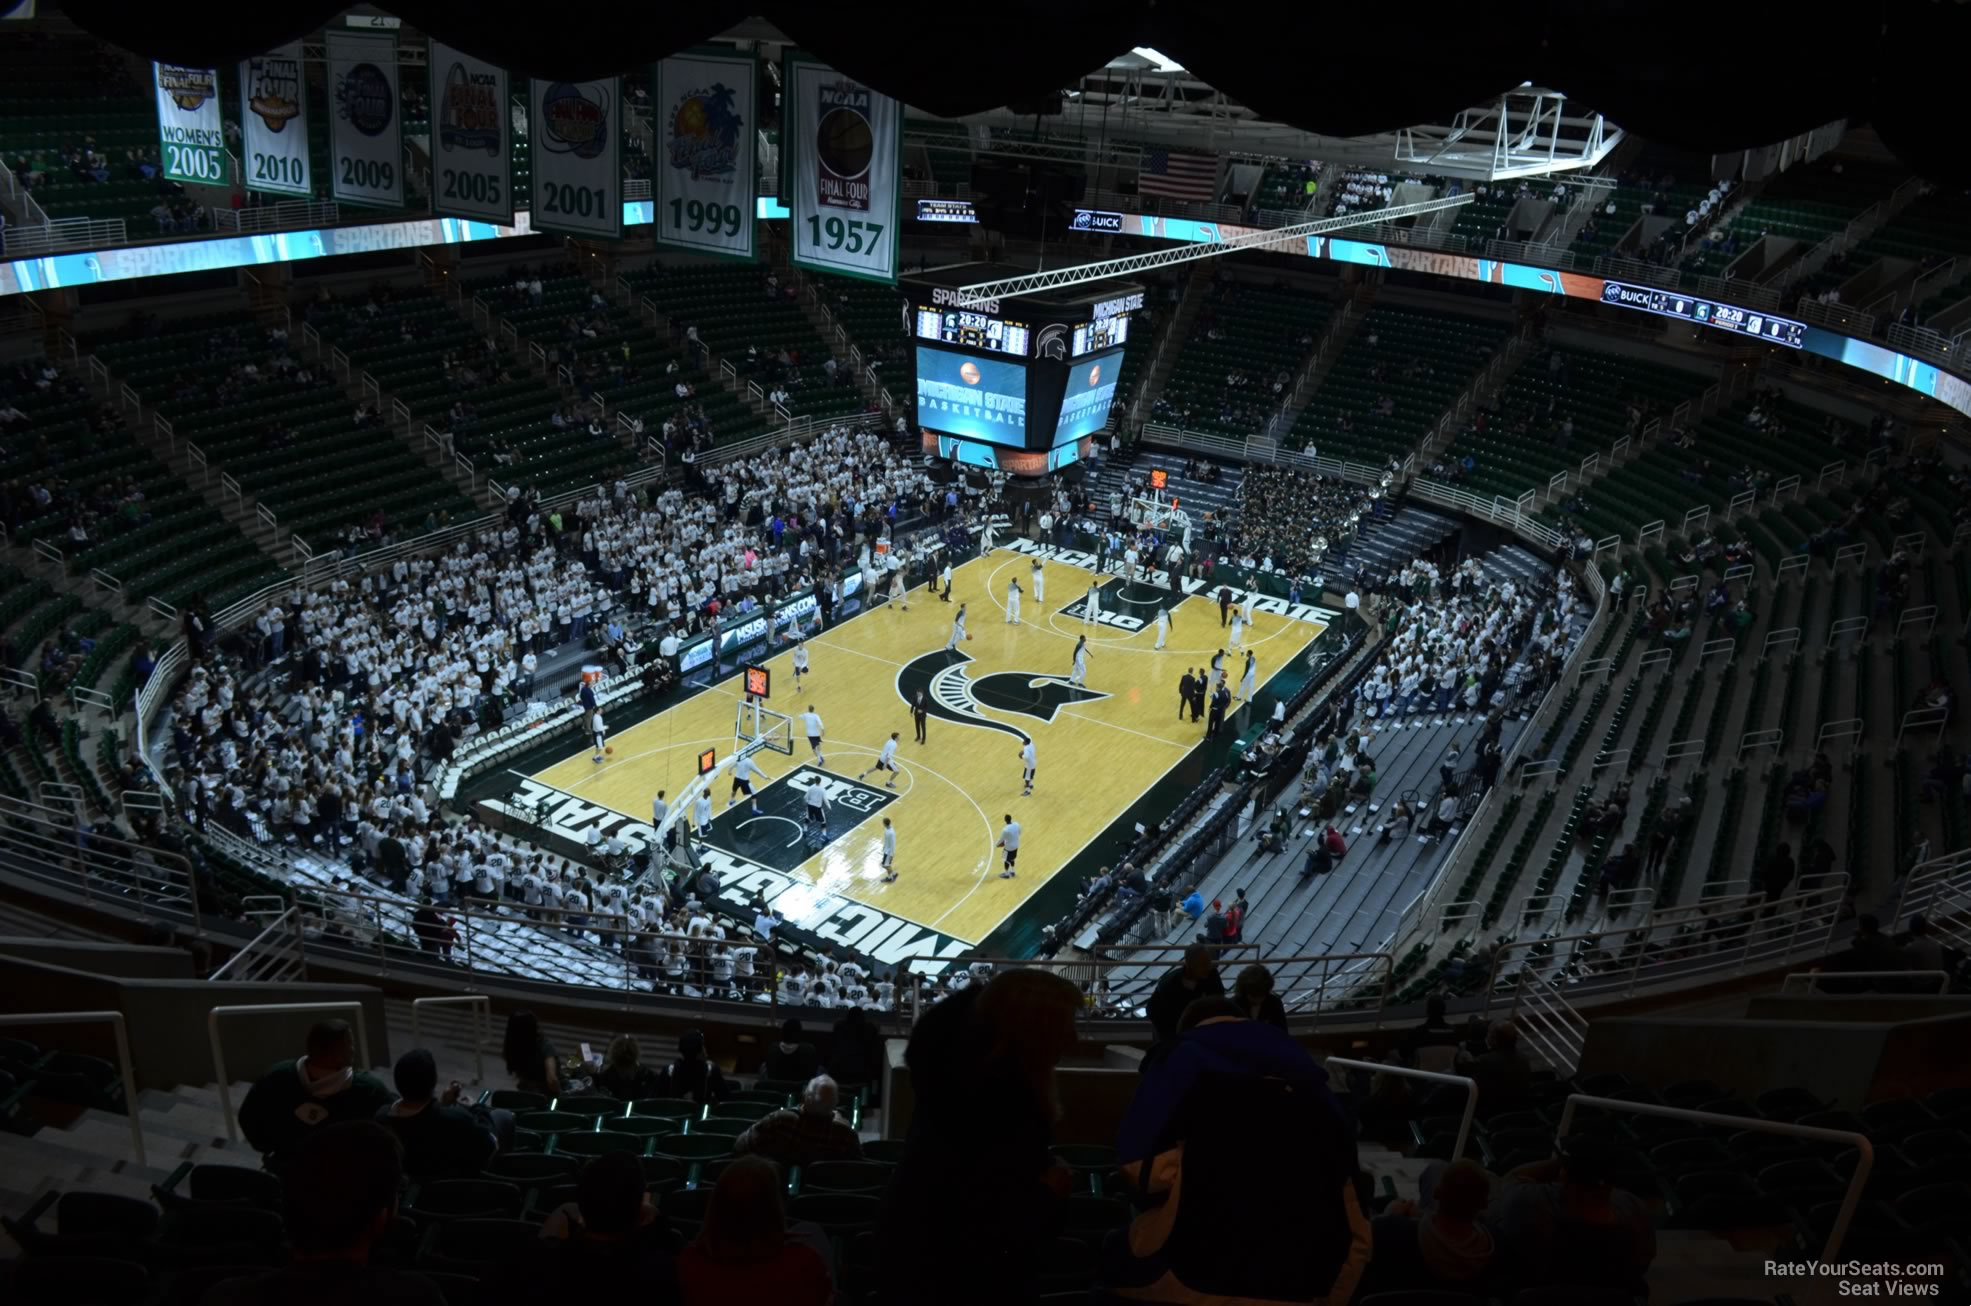 section 233, row 15 seat view  - breslin center